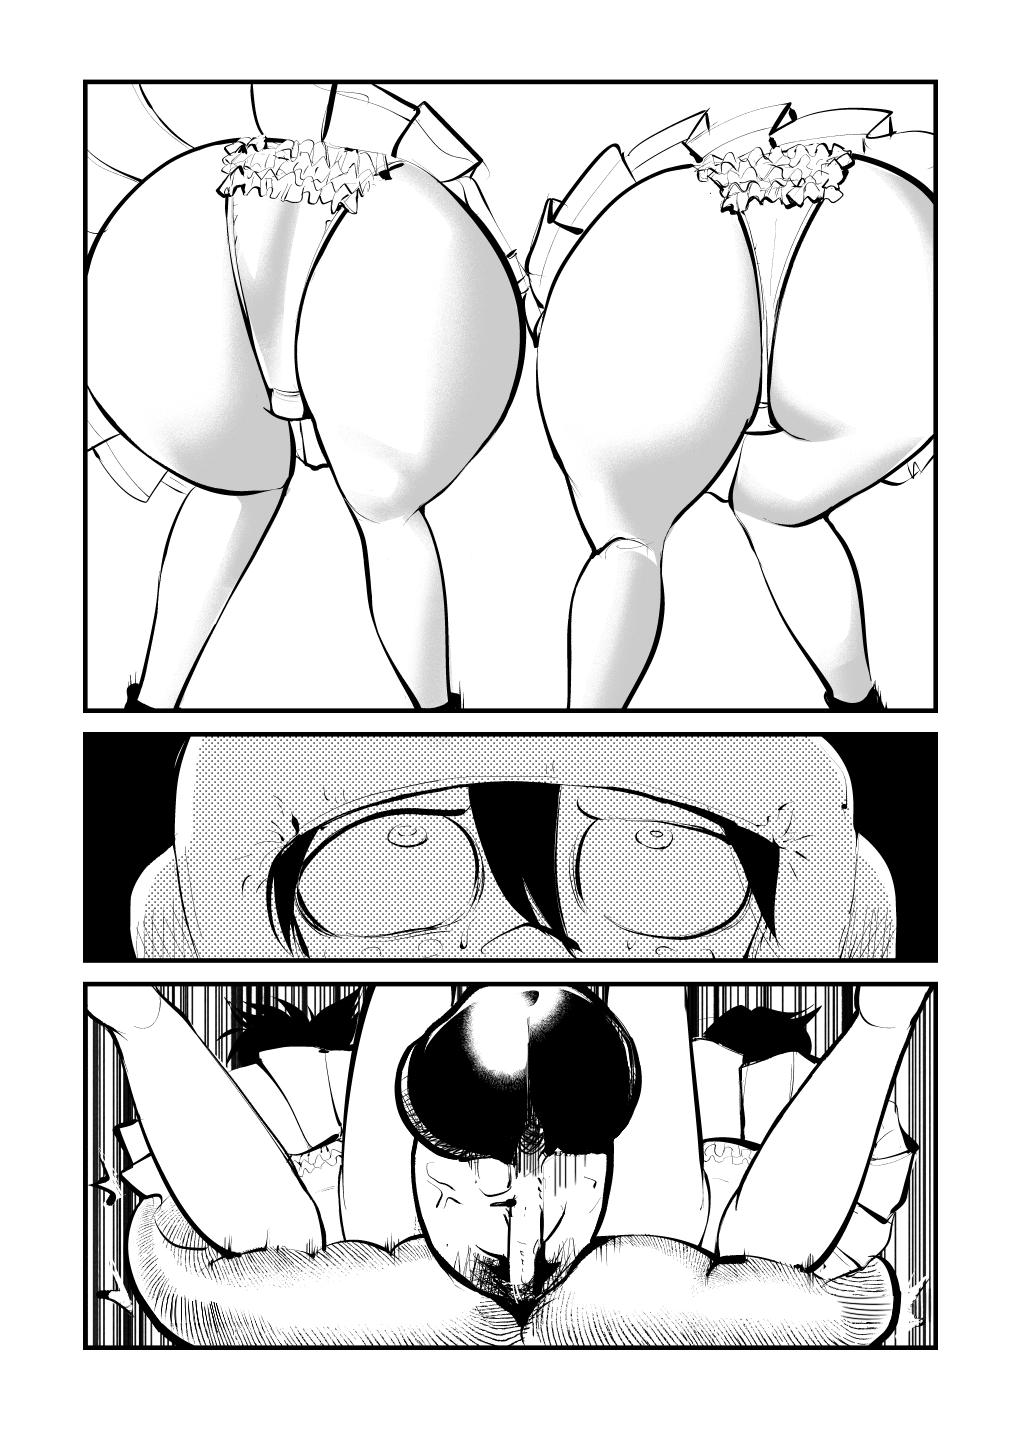 Action Dick Boxing Ex Gf - Page 29